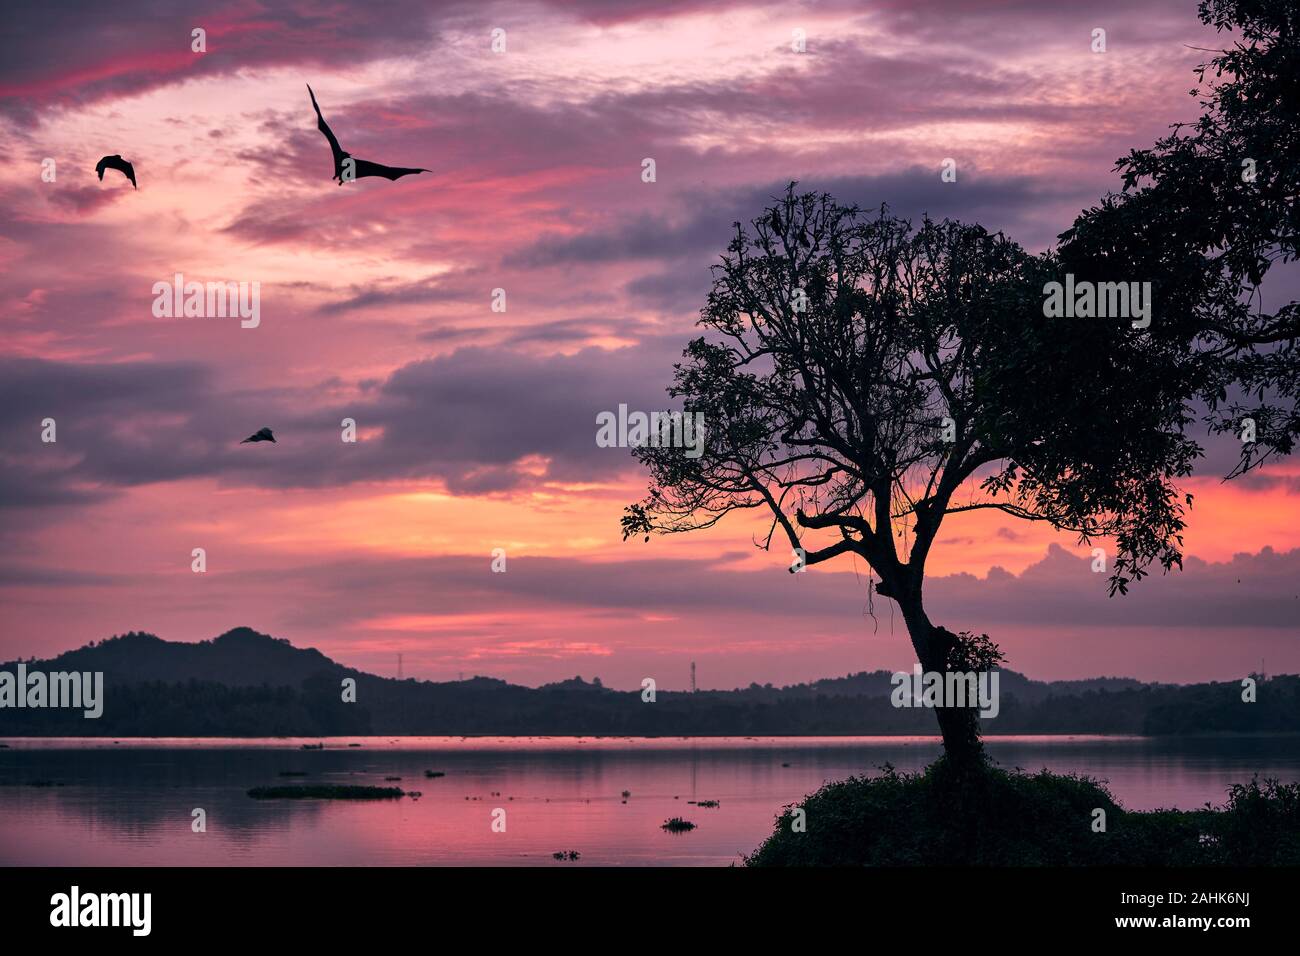 Indian fruit bats (species of flying foxes) on sky against moody sunset. Scary scene at dusk in Sri Lanka. Stock Photo